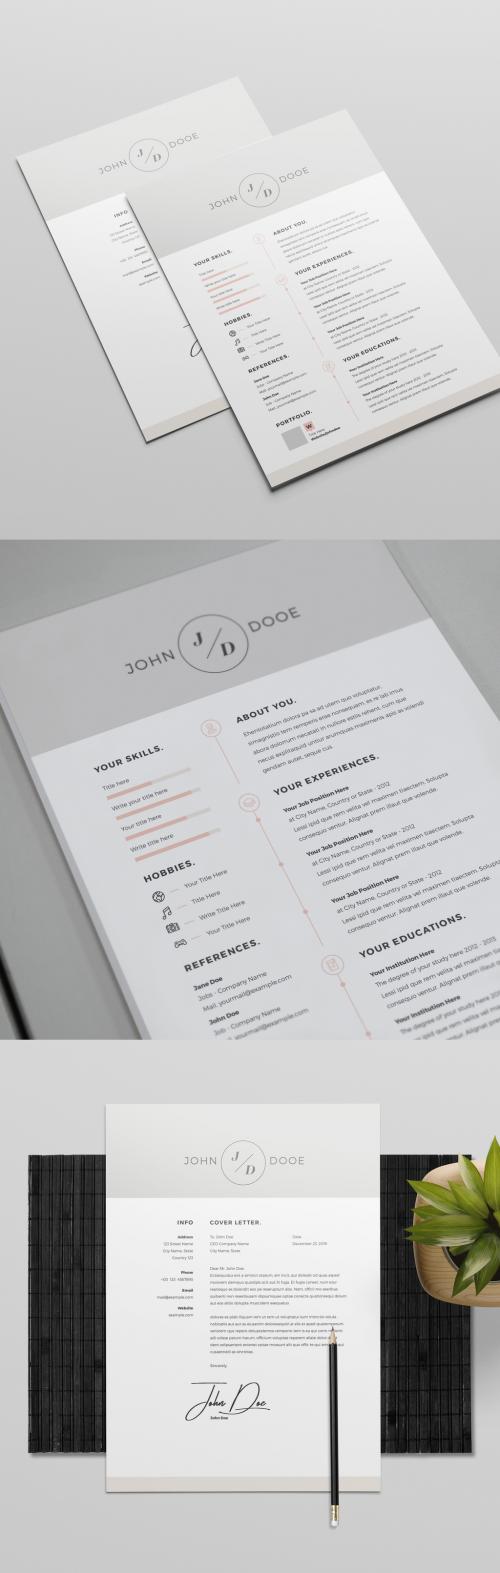 Adobe Stock - Resume Layout Set with Gray Header and Footer - 225937130